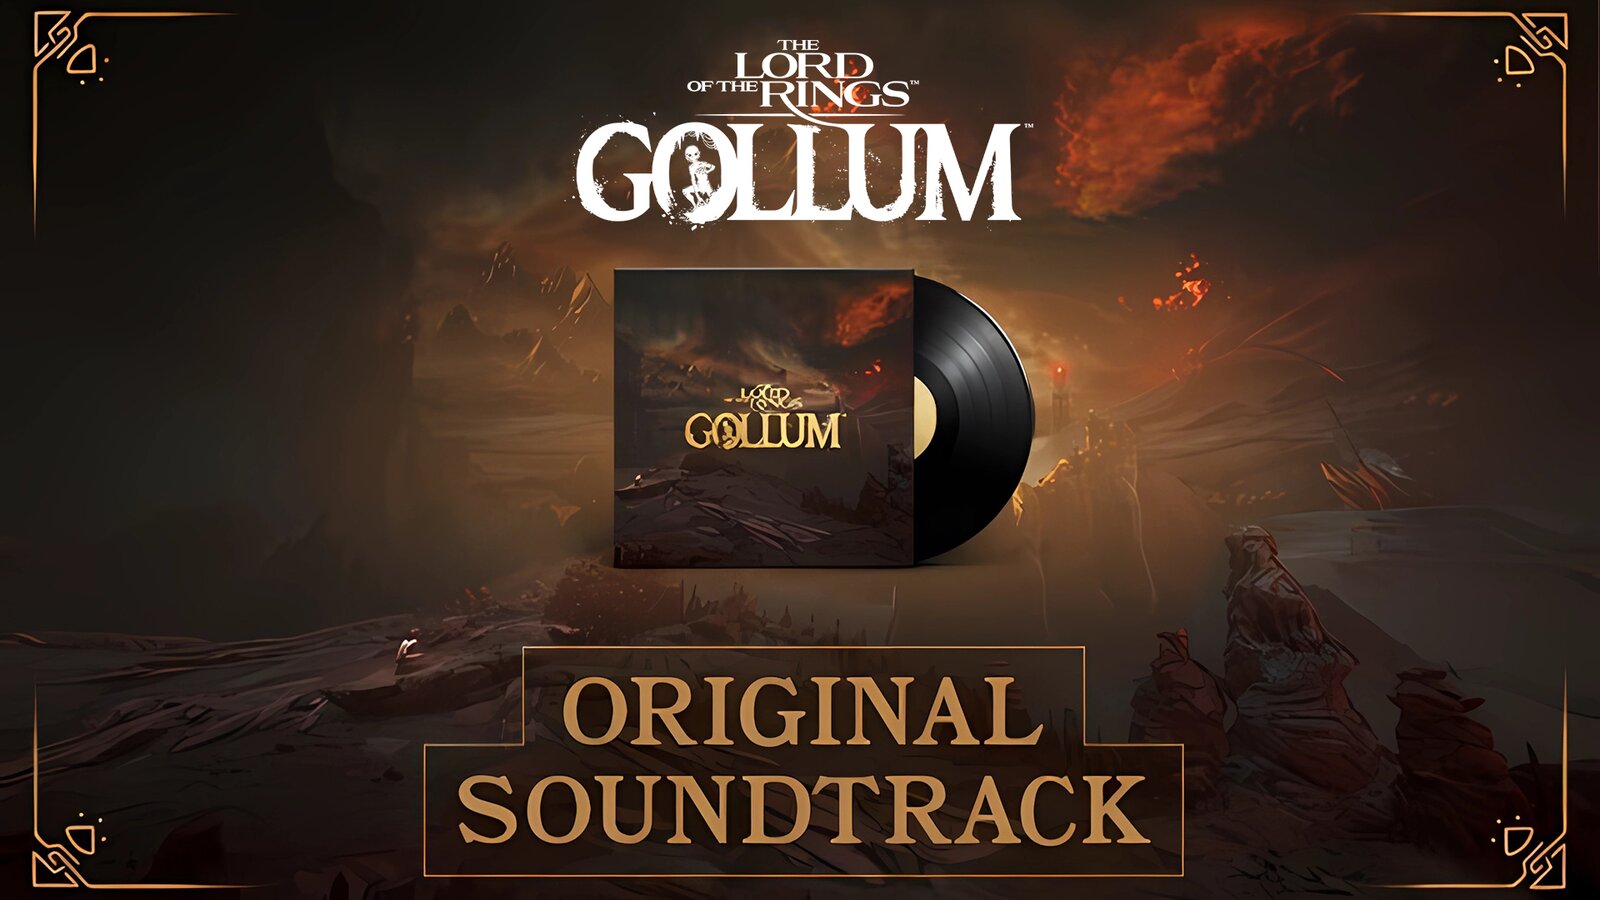 The Lord of the Rings: Gollum - Original Soundtrack